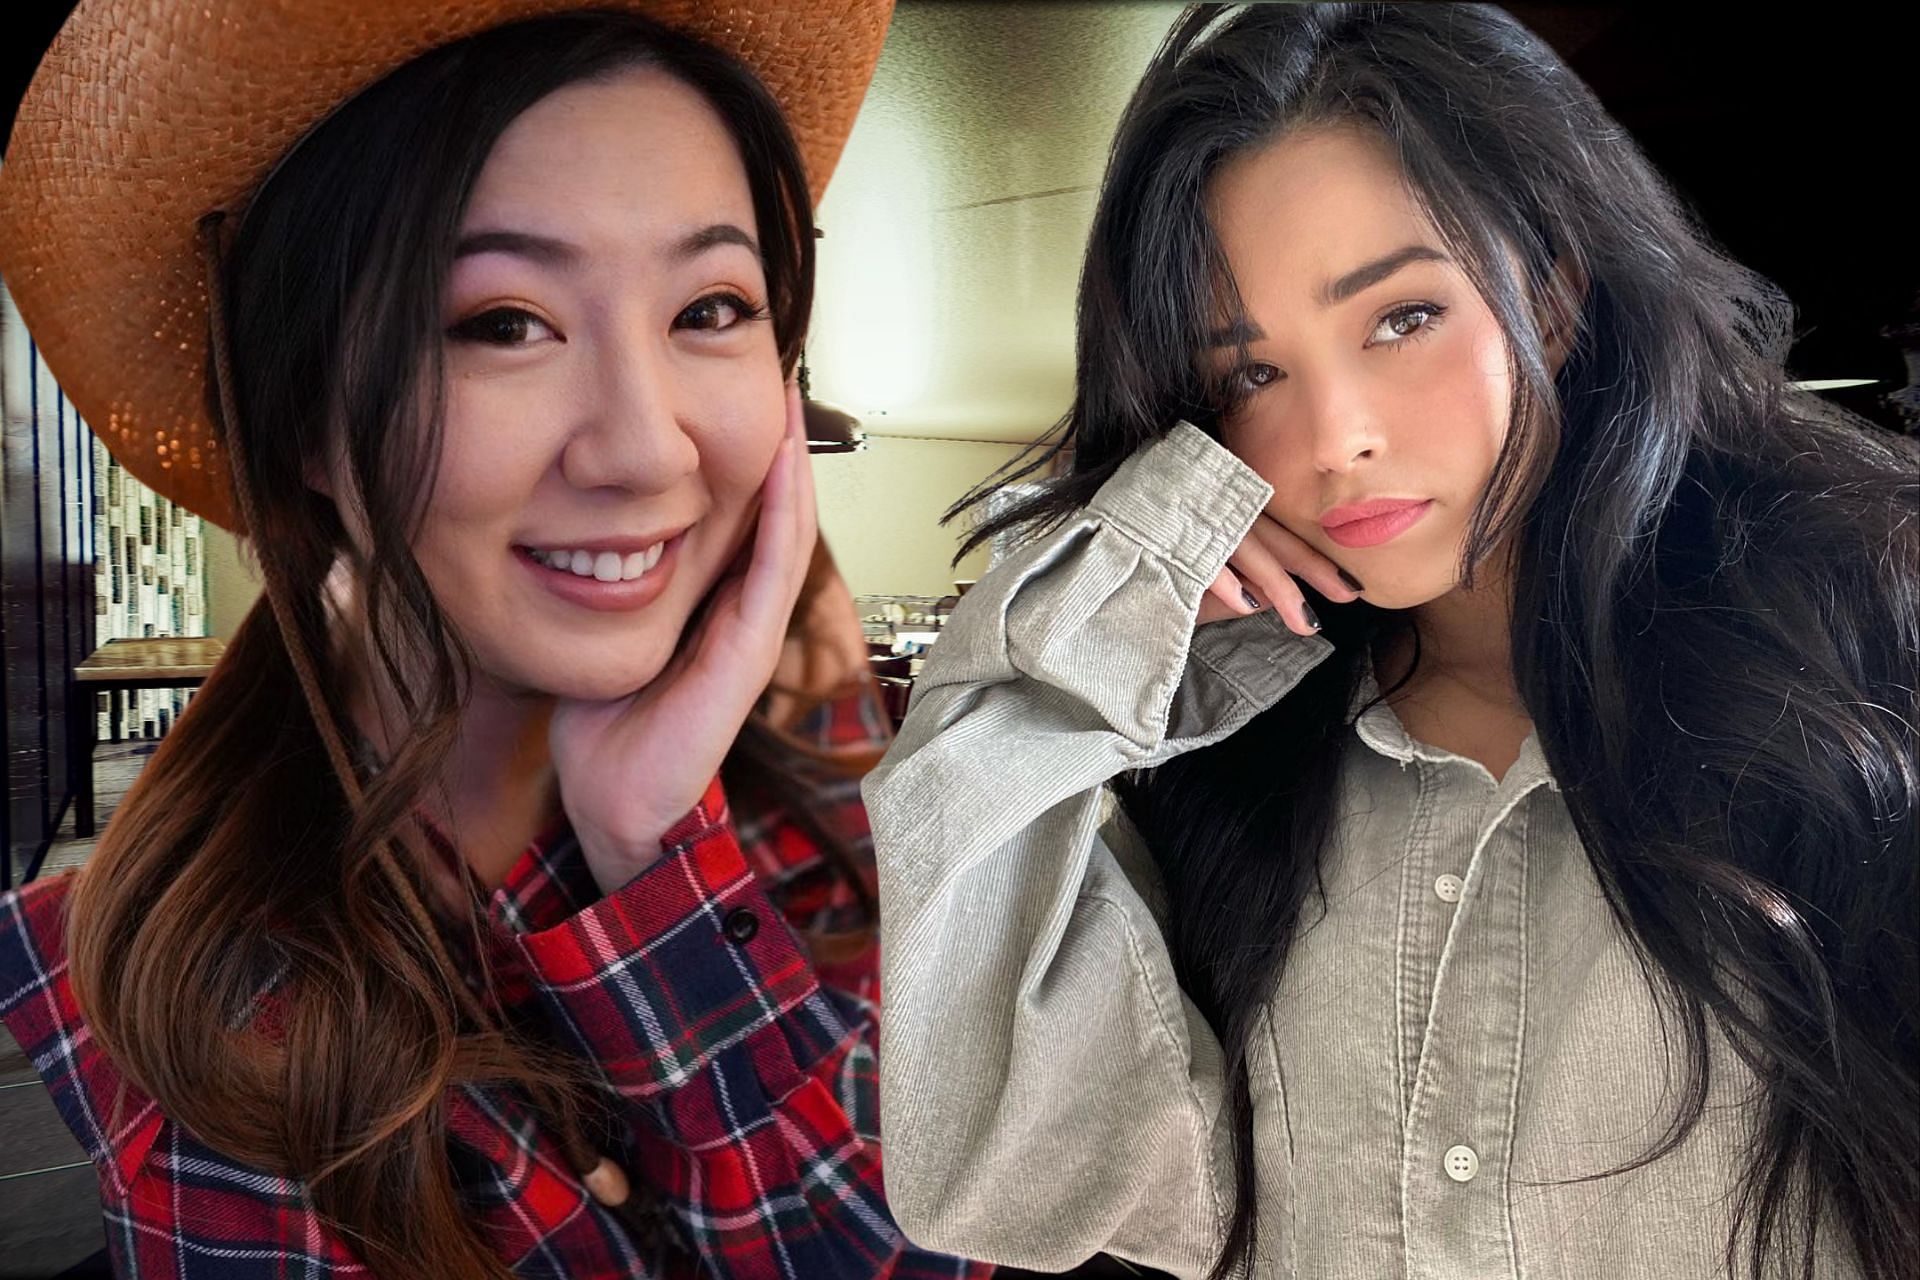 Valkyrae and the online community react to the viral moment when